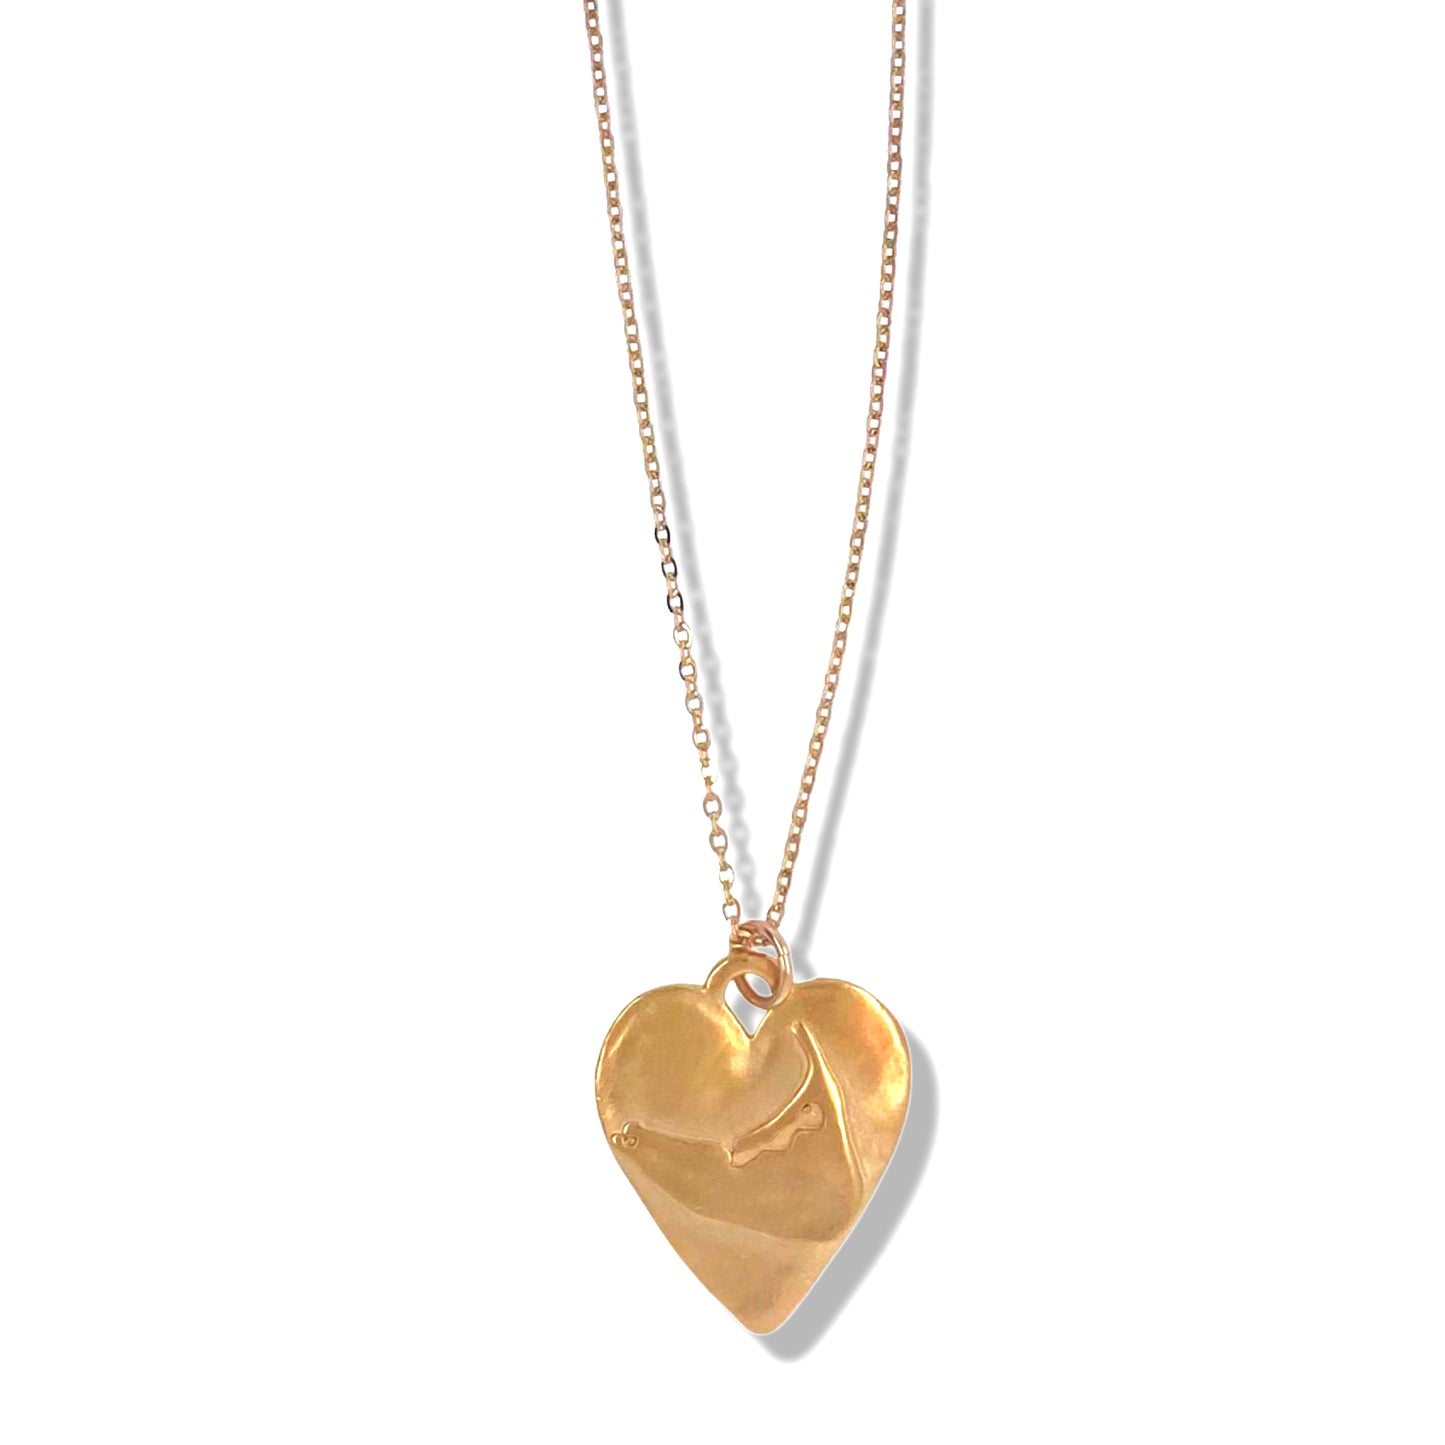 714NLG - Nantucket Large Heart Necklace in Gold